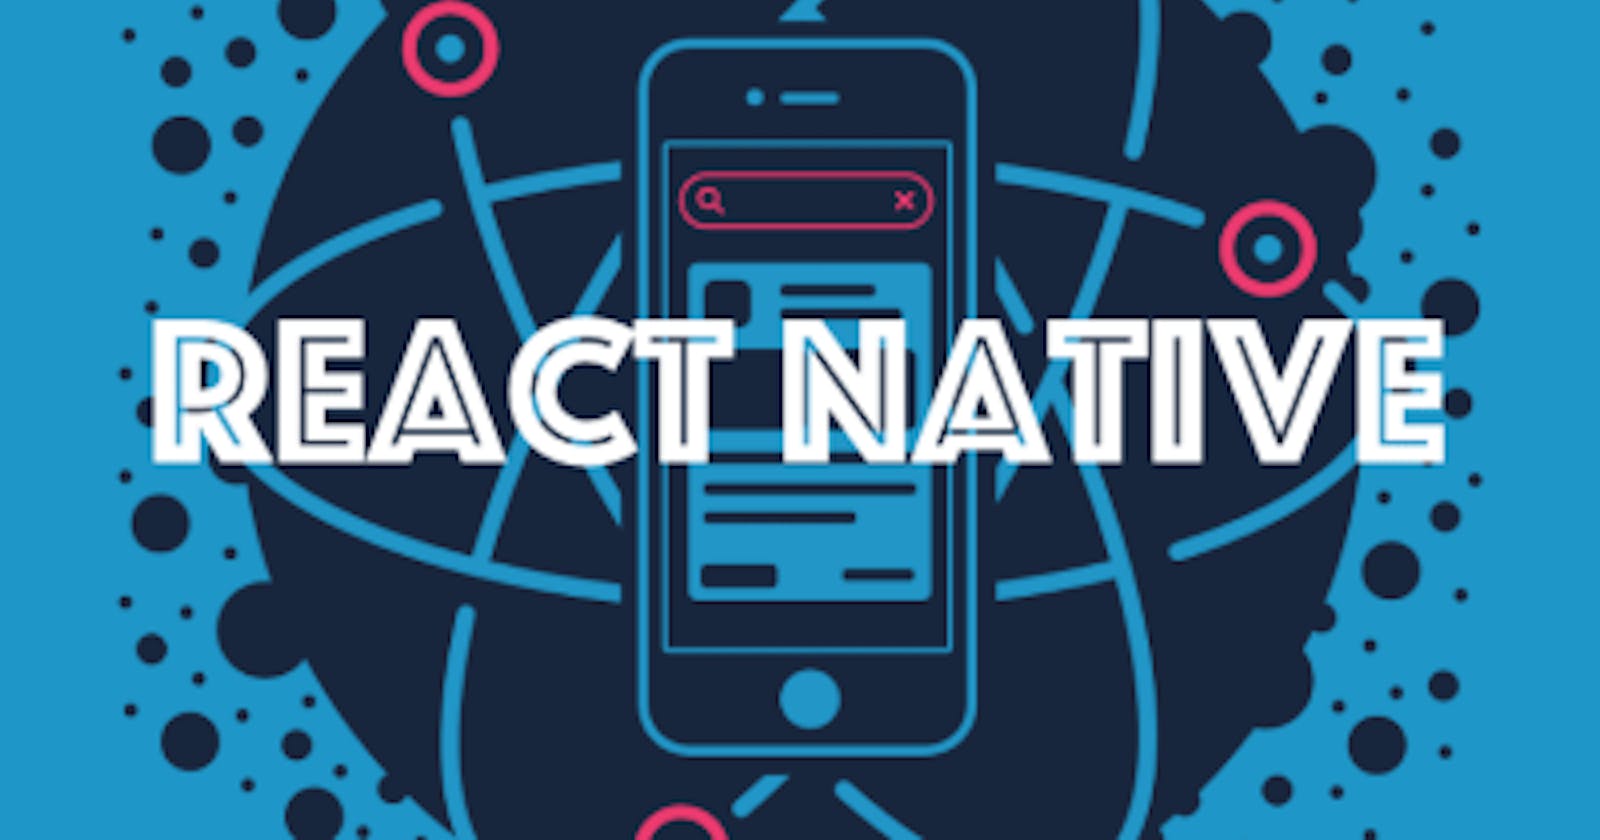 React Native Development concepts - State